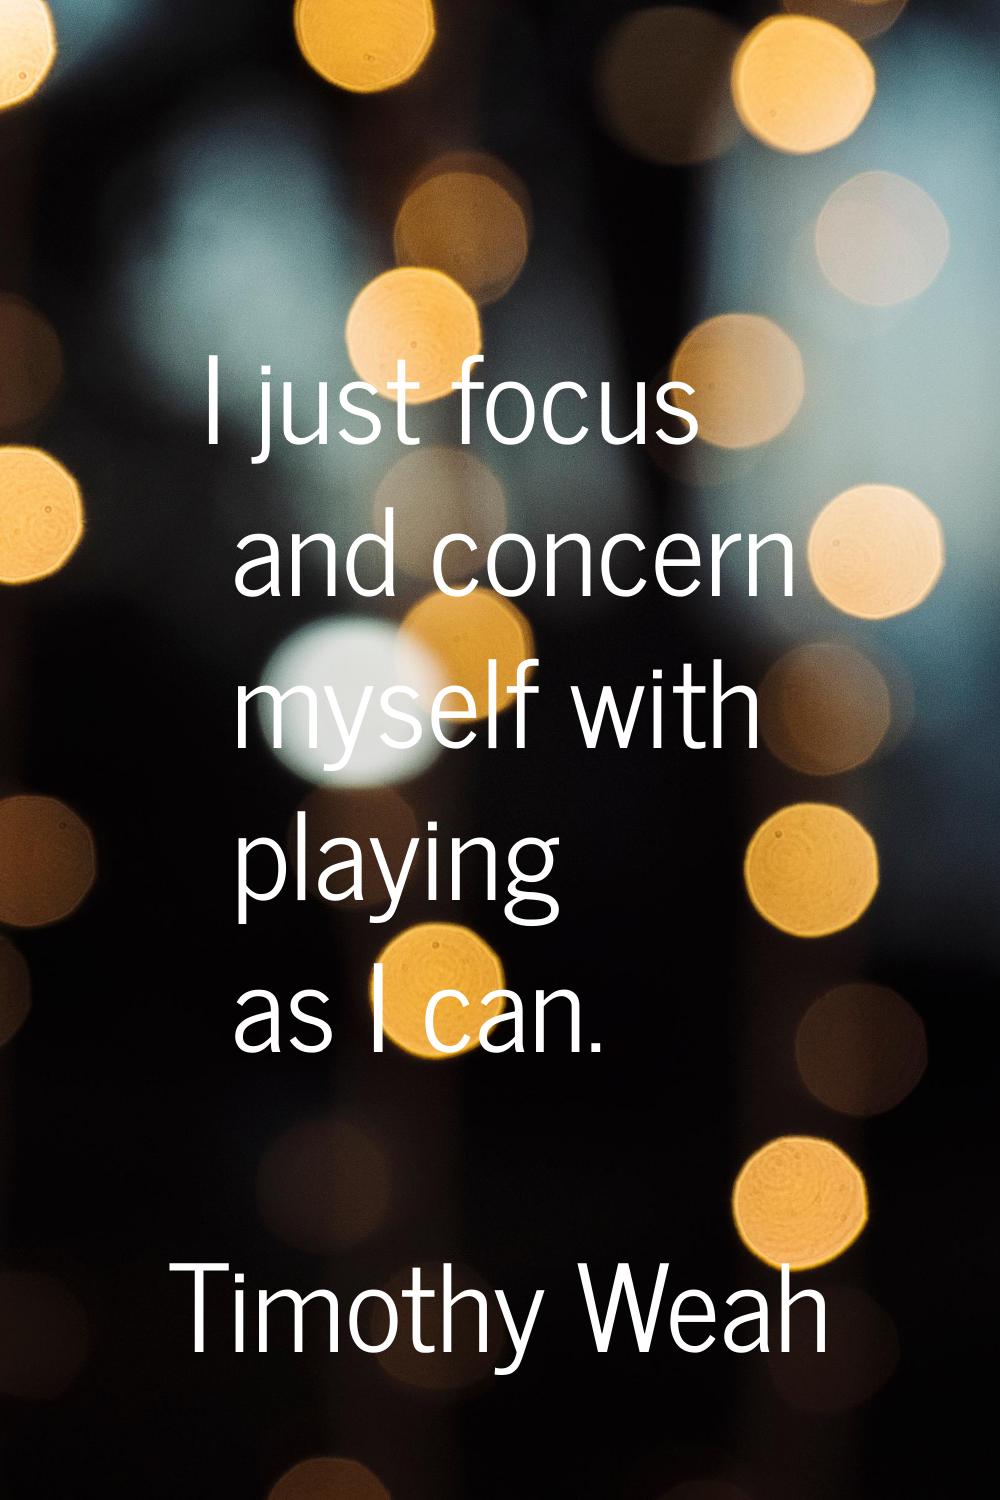 I just focus and concern myself with playing as I can.